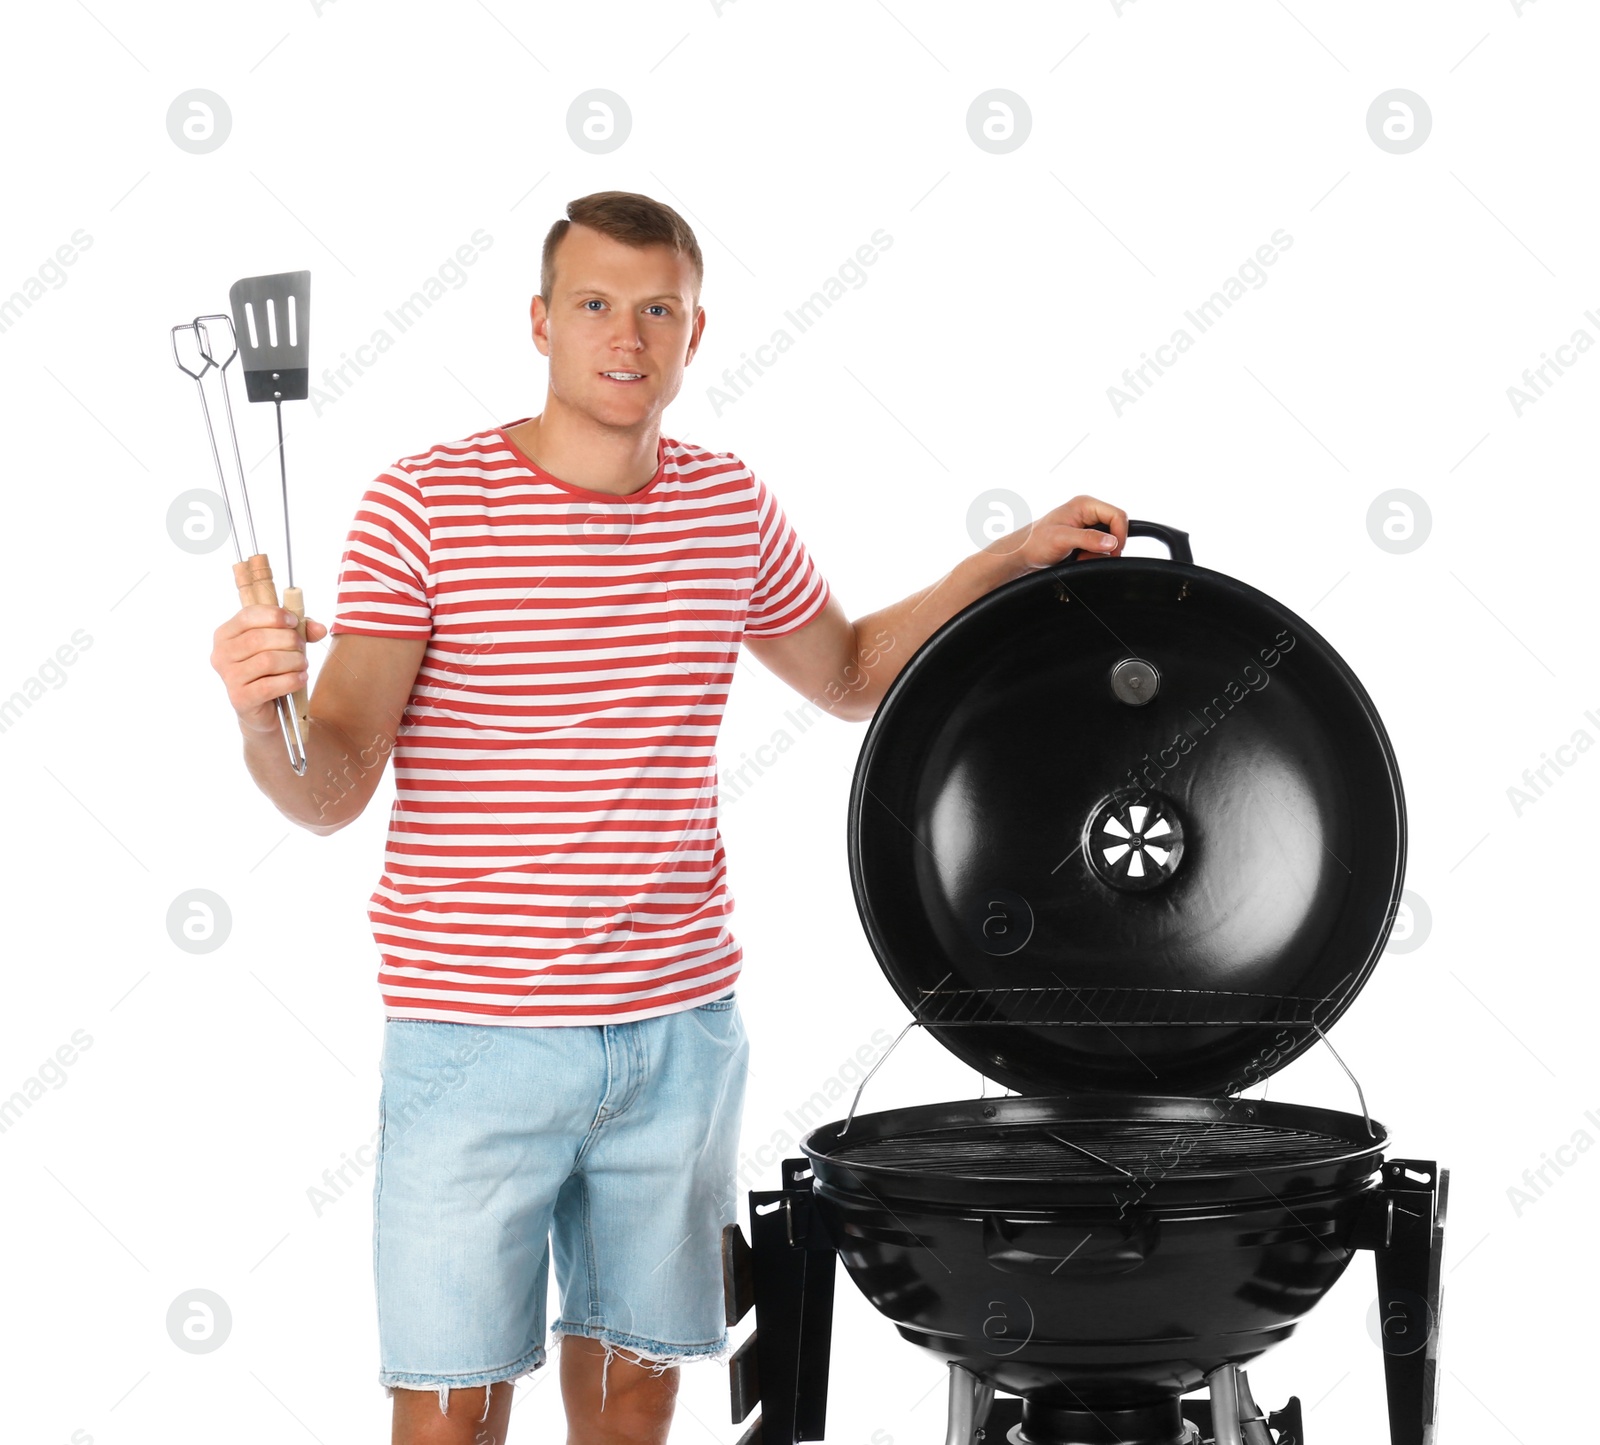 Photo of Man with barbecue grill and utensils on white background